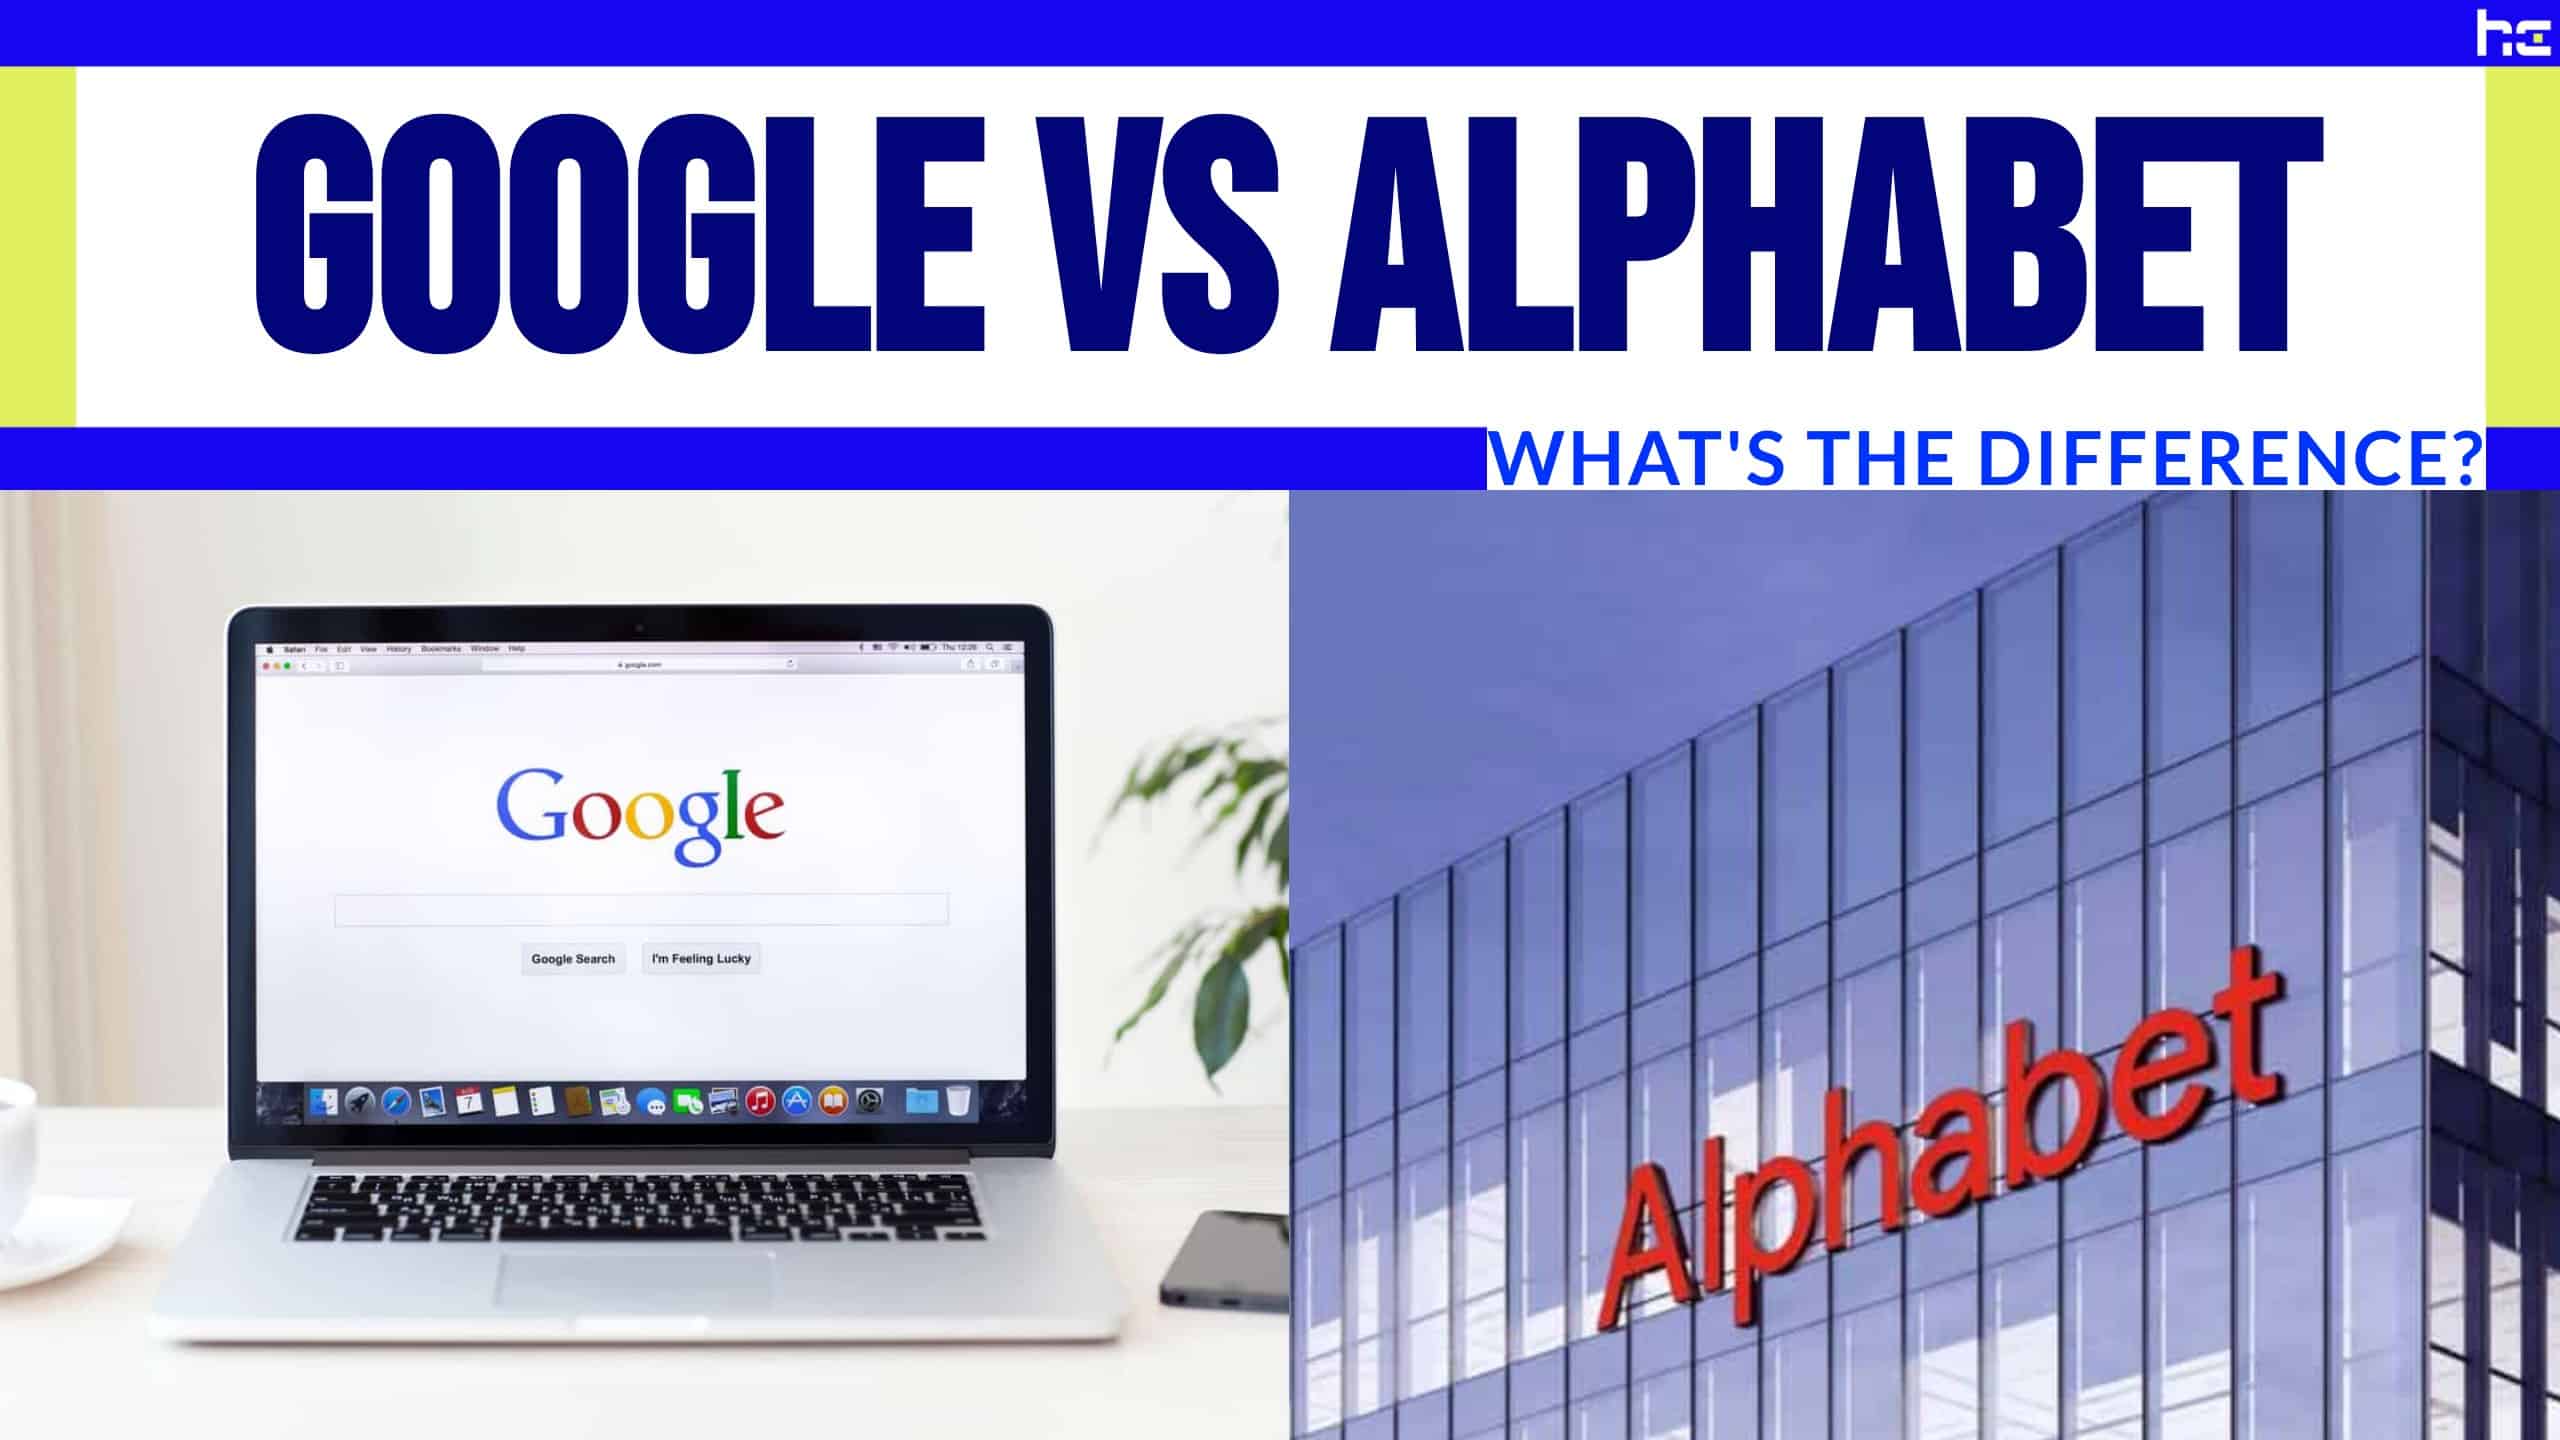 Google and Alphabet logos placed side by side.